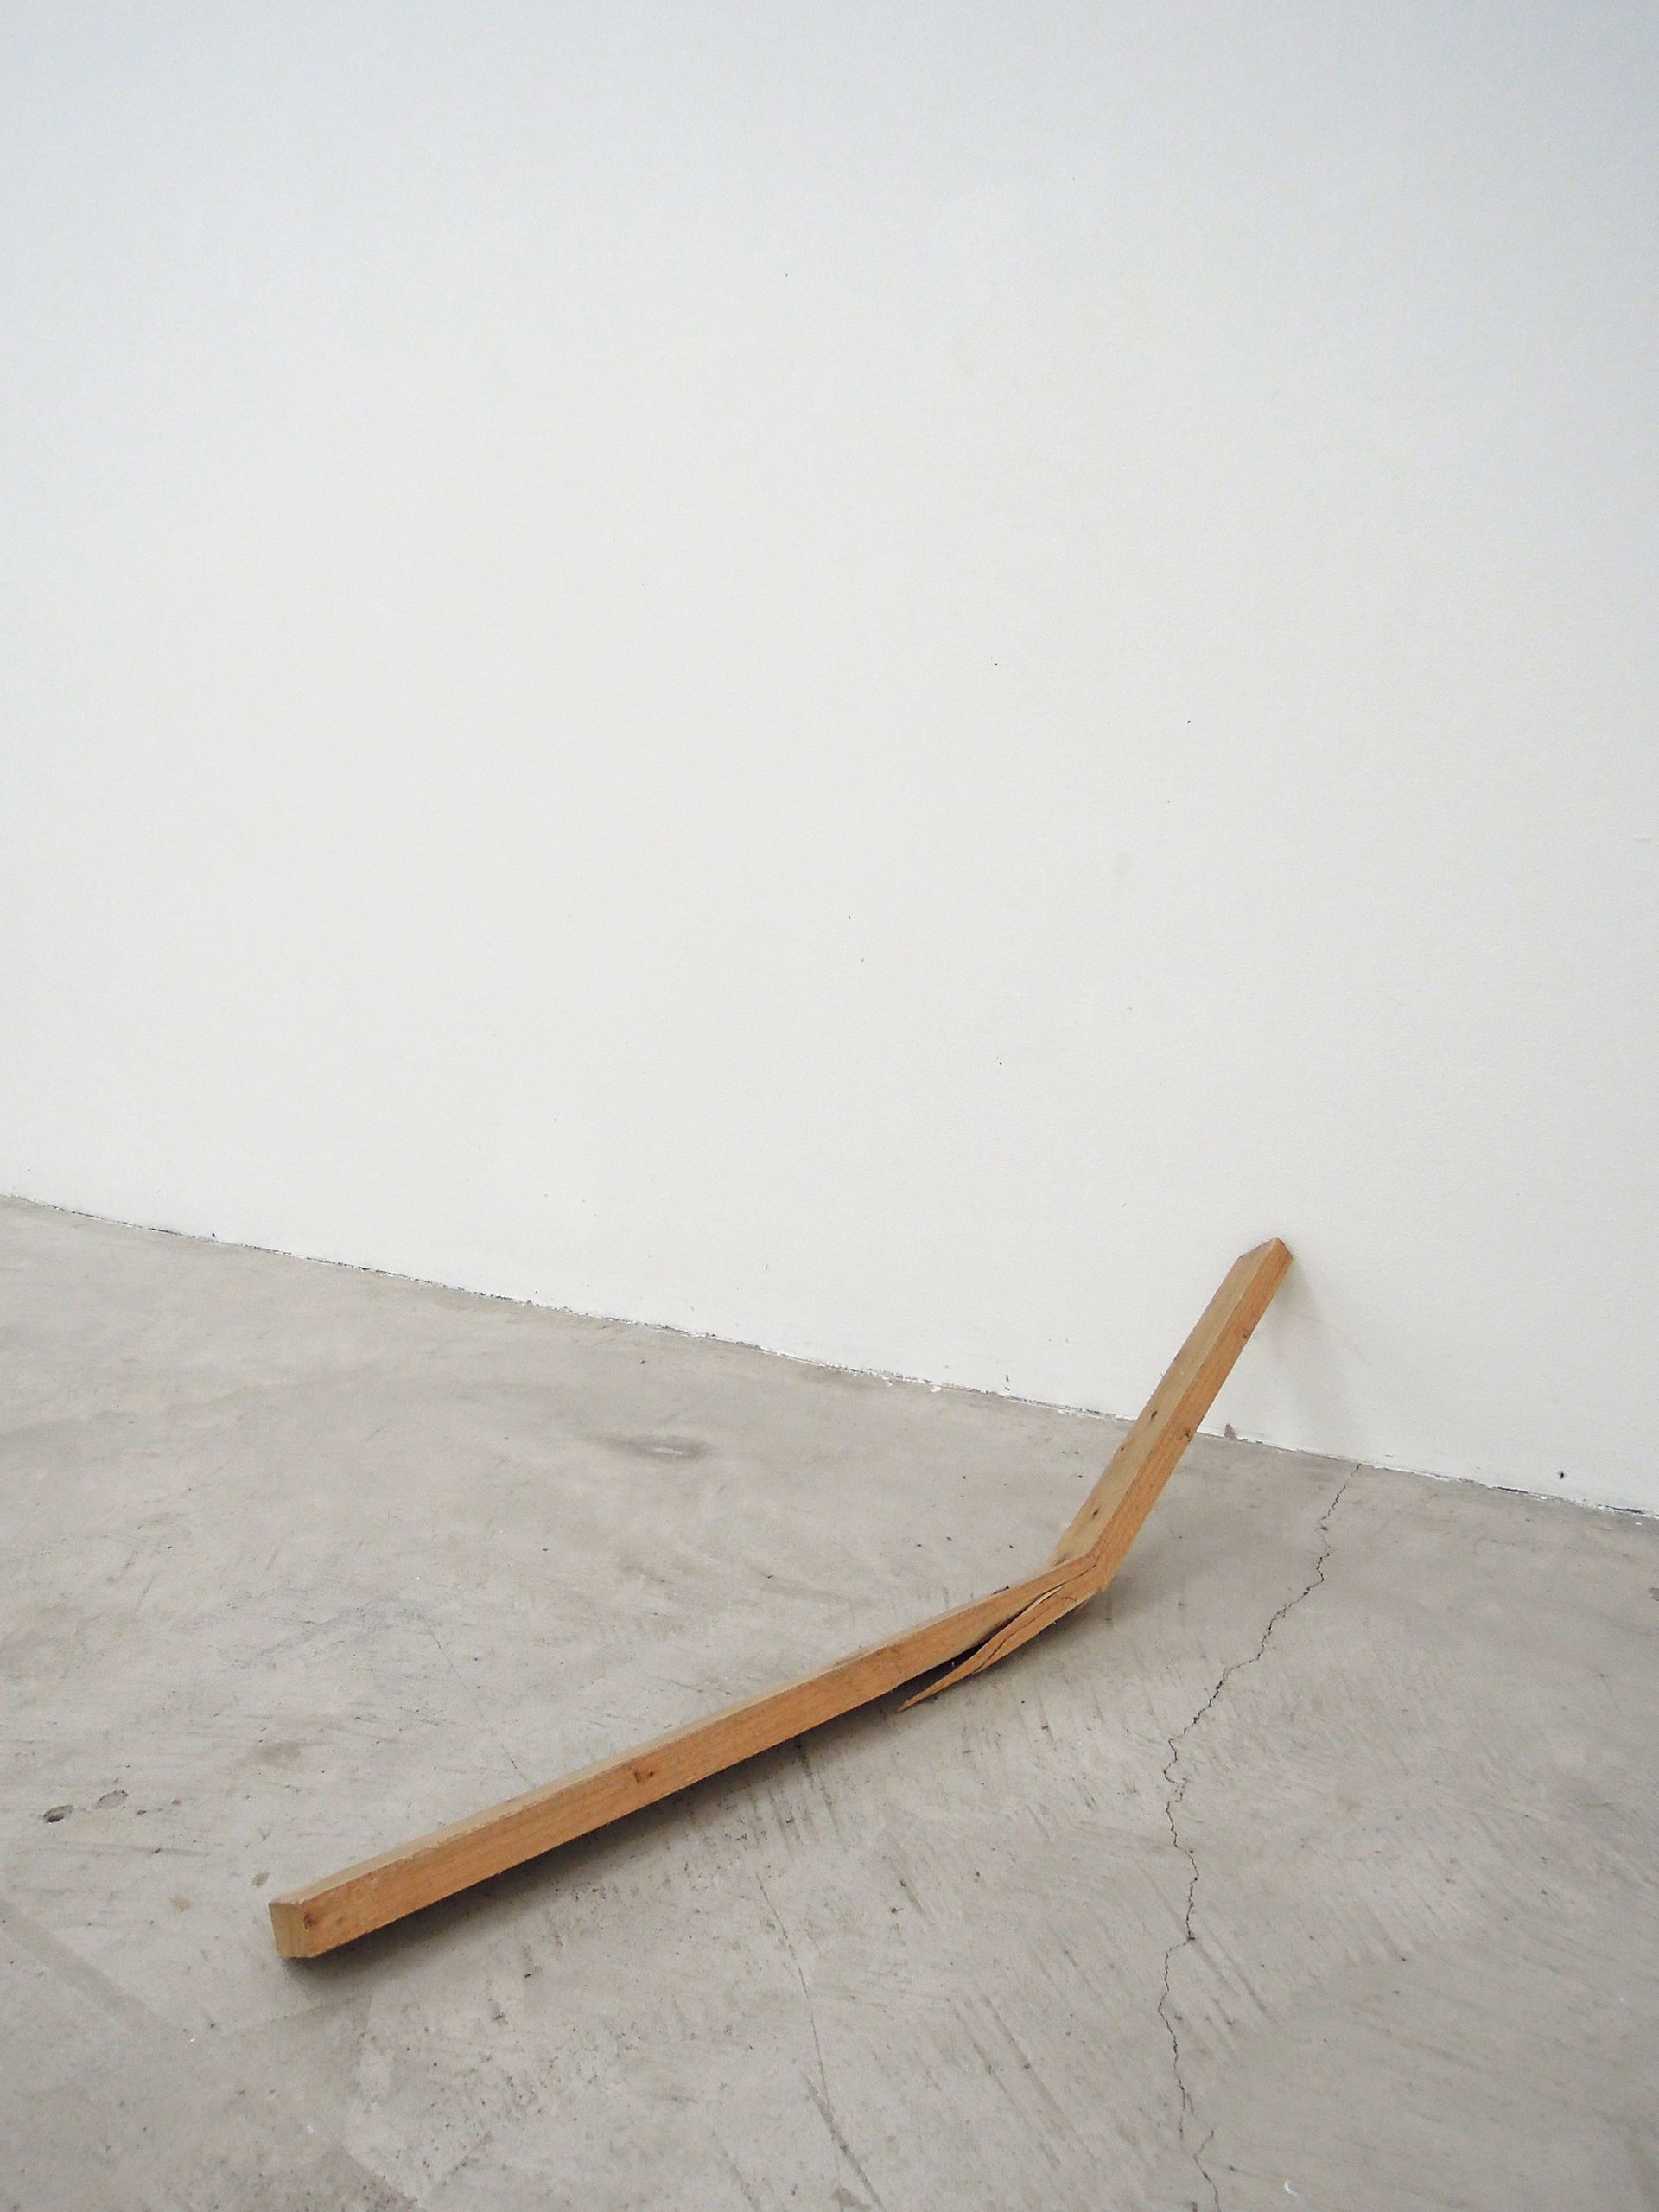 A valve for a spontaneous aggression (Basel), 2014
Broken plank, dimensions variable. This series of broken planks is a result of an action Geiger executed at various places: He leaned planks against house walls. Some time later, he returned to these spots and found most of the planks kicked through and broken